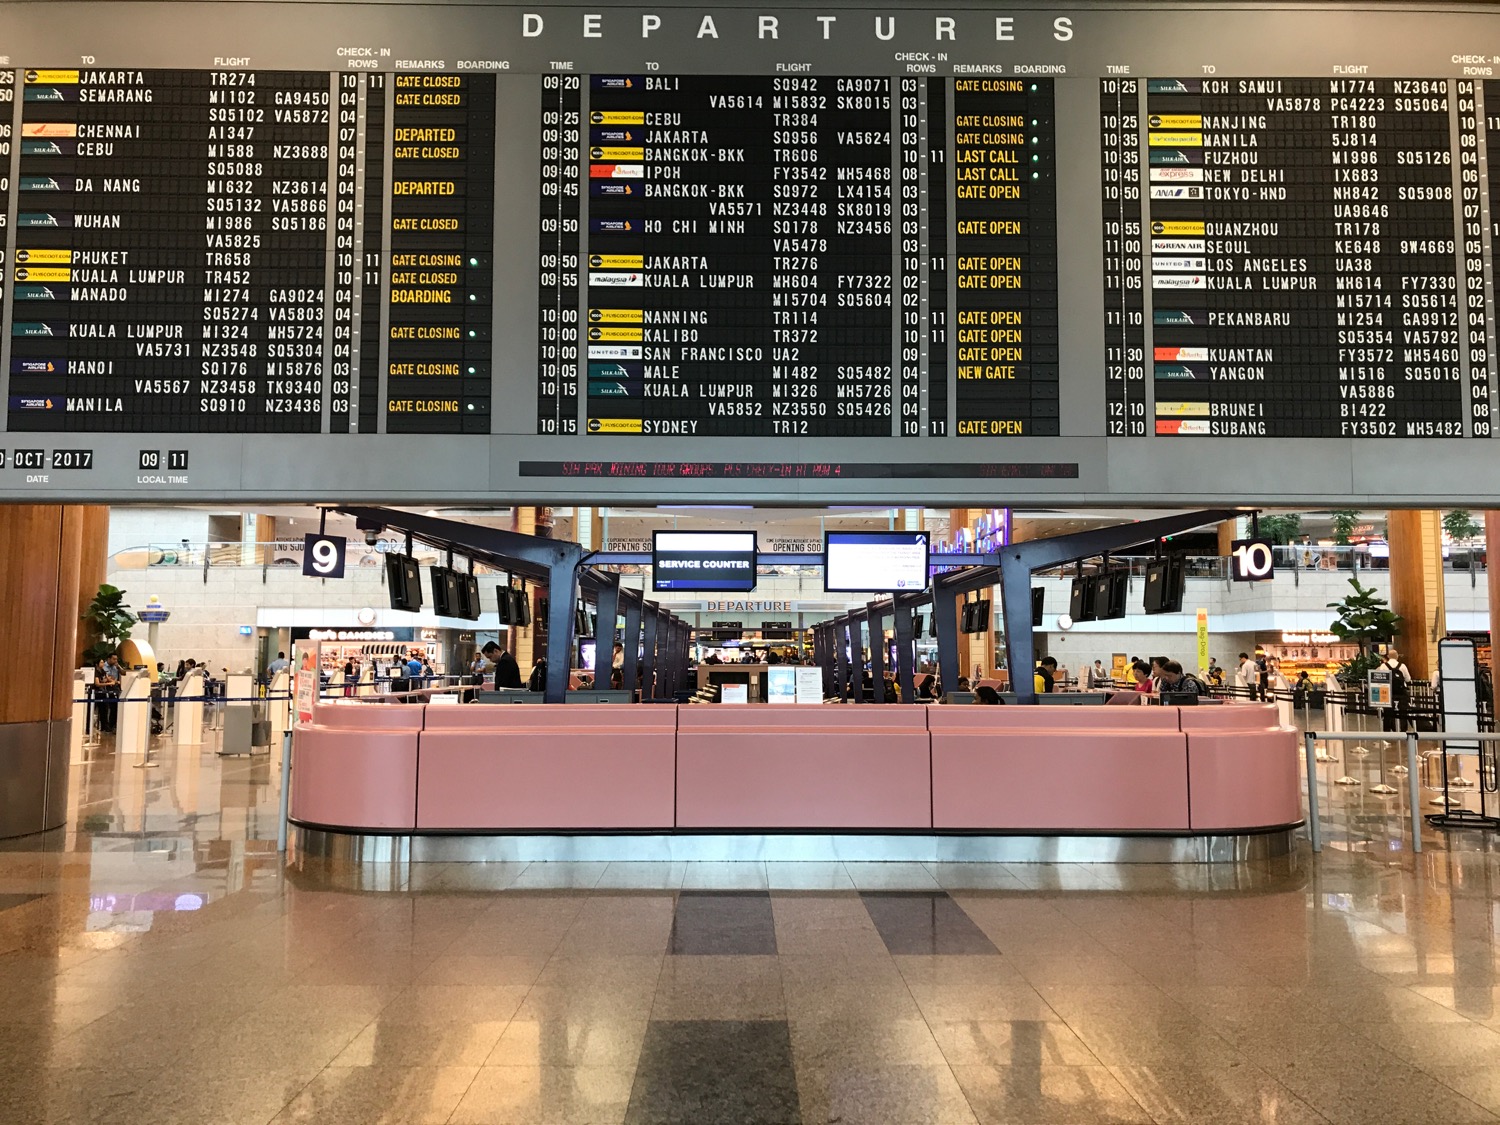 a large display board in a airport